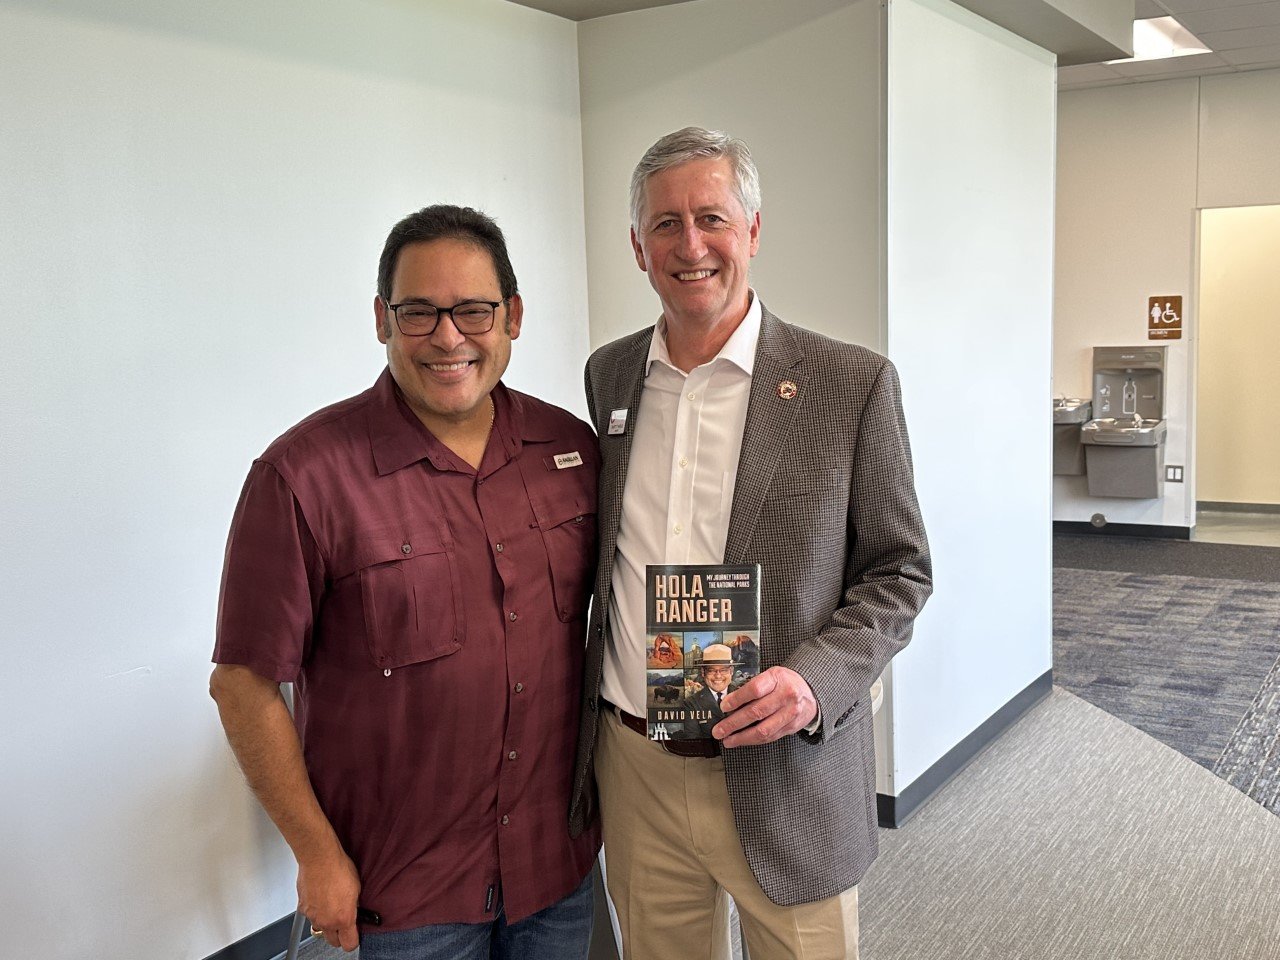 David Vela, former national parks administrator (left), presents Mayor Dusty Thiele with a copy of his memoir, Hola Ranger. Vela, formerly of Wharton, was the featured speaker at the Jan. 11 Katy Area Retired Educators meeting. He shared some of his experiences over his decades-long career.